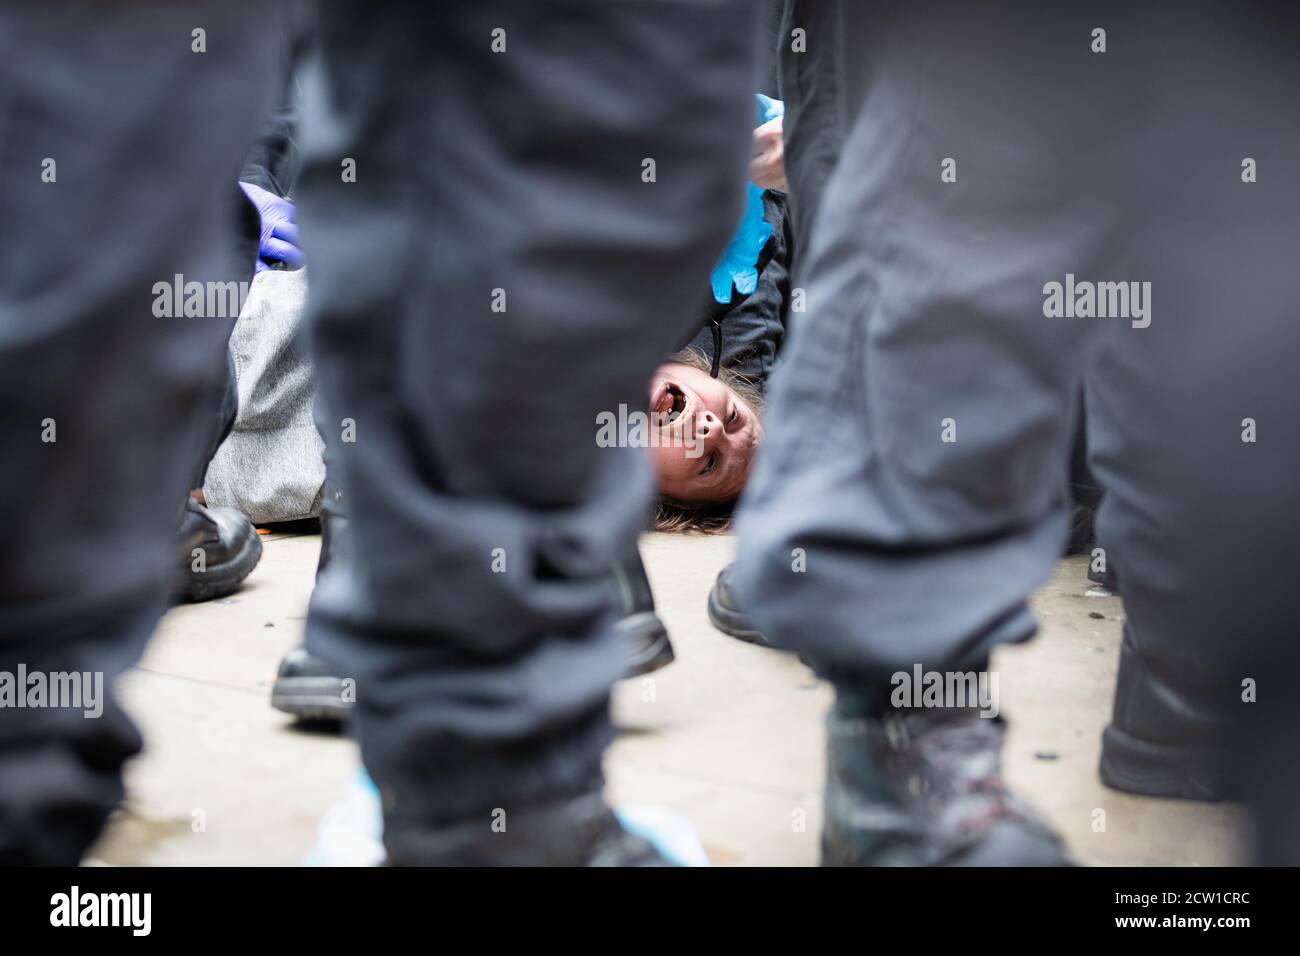 London, UK. 26th Sep, 2020. A protester is arrested after the MET police moved in on a Unite for Freedom rally after alleged reports they had broke the risk assignment which was arranged to carry out the rally. Emergency legislationÊknown as theÊCoronavirus Act 2020Êhas been introduced by the governmentÊto help theÊcountry cope with the demands caused by the coronavirus outbreak. Credit: Andy Barton/Alamy Live News Stock Photo